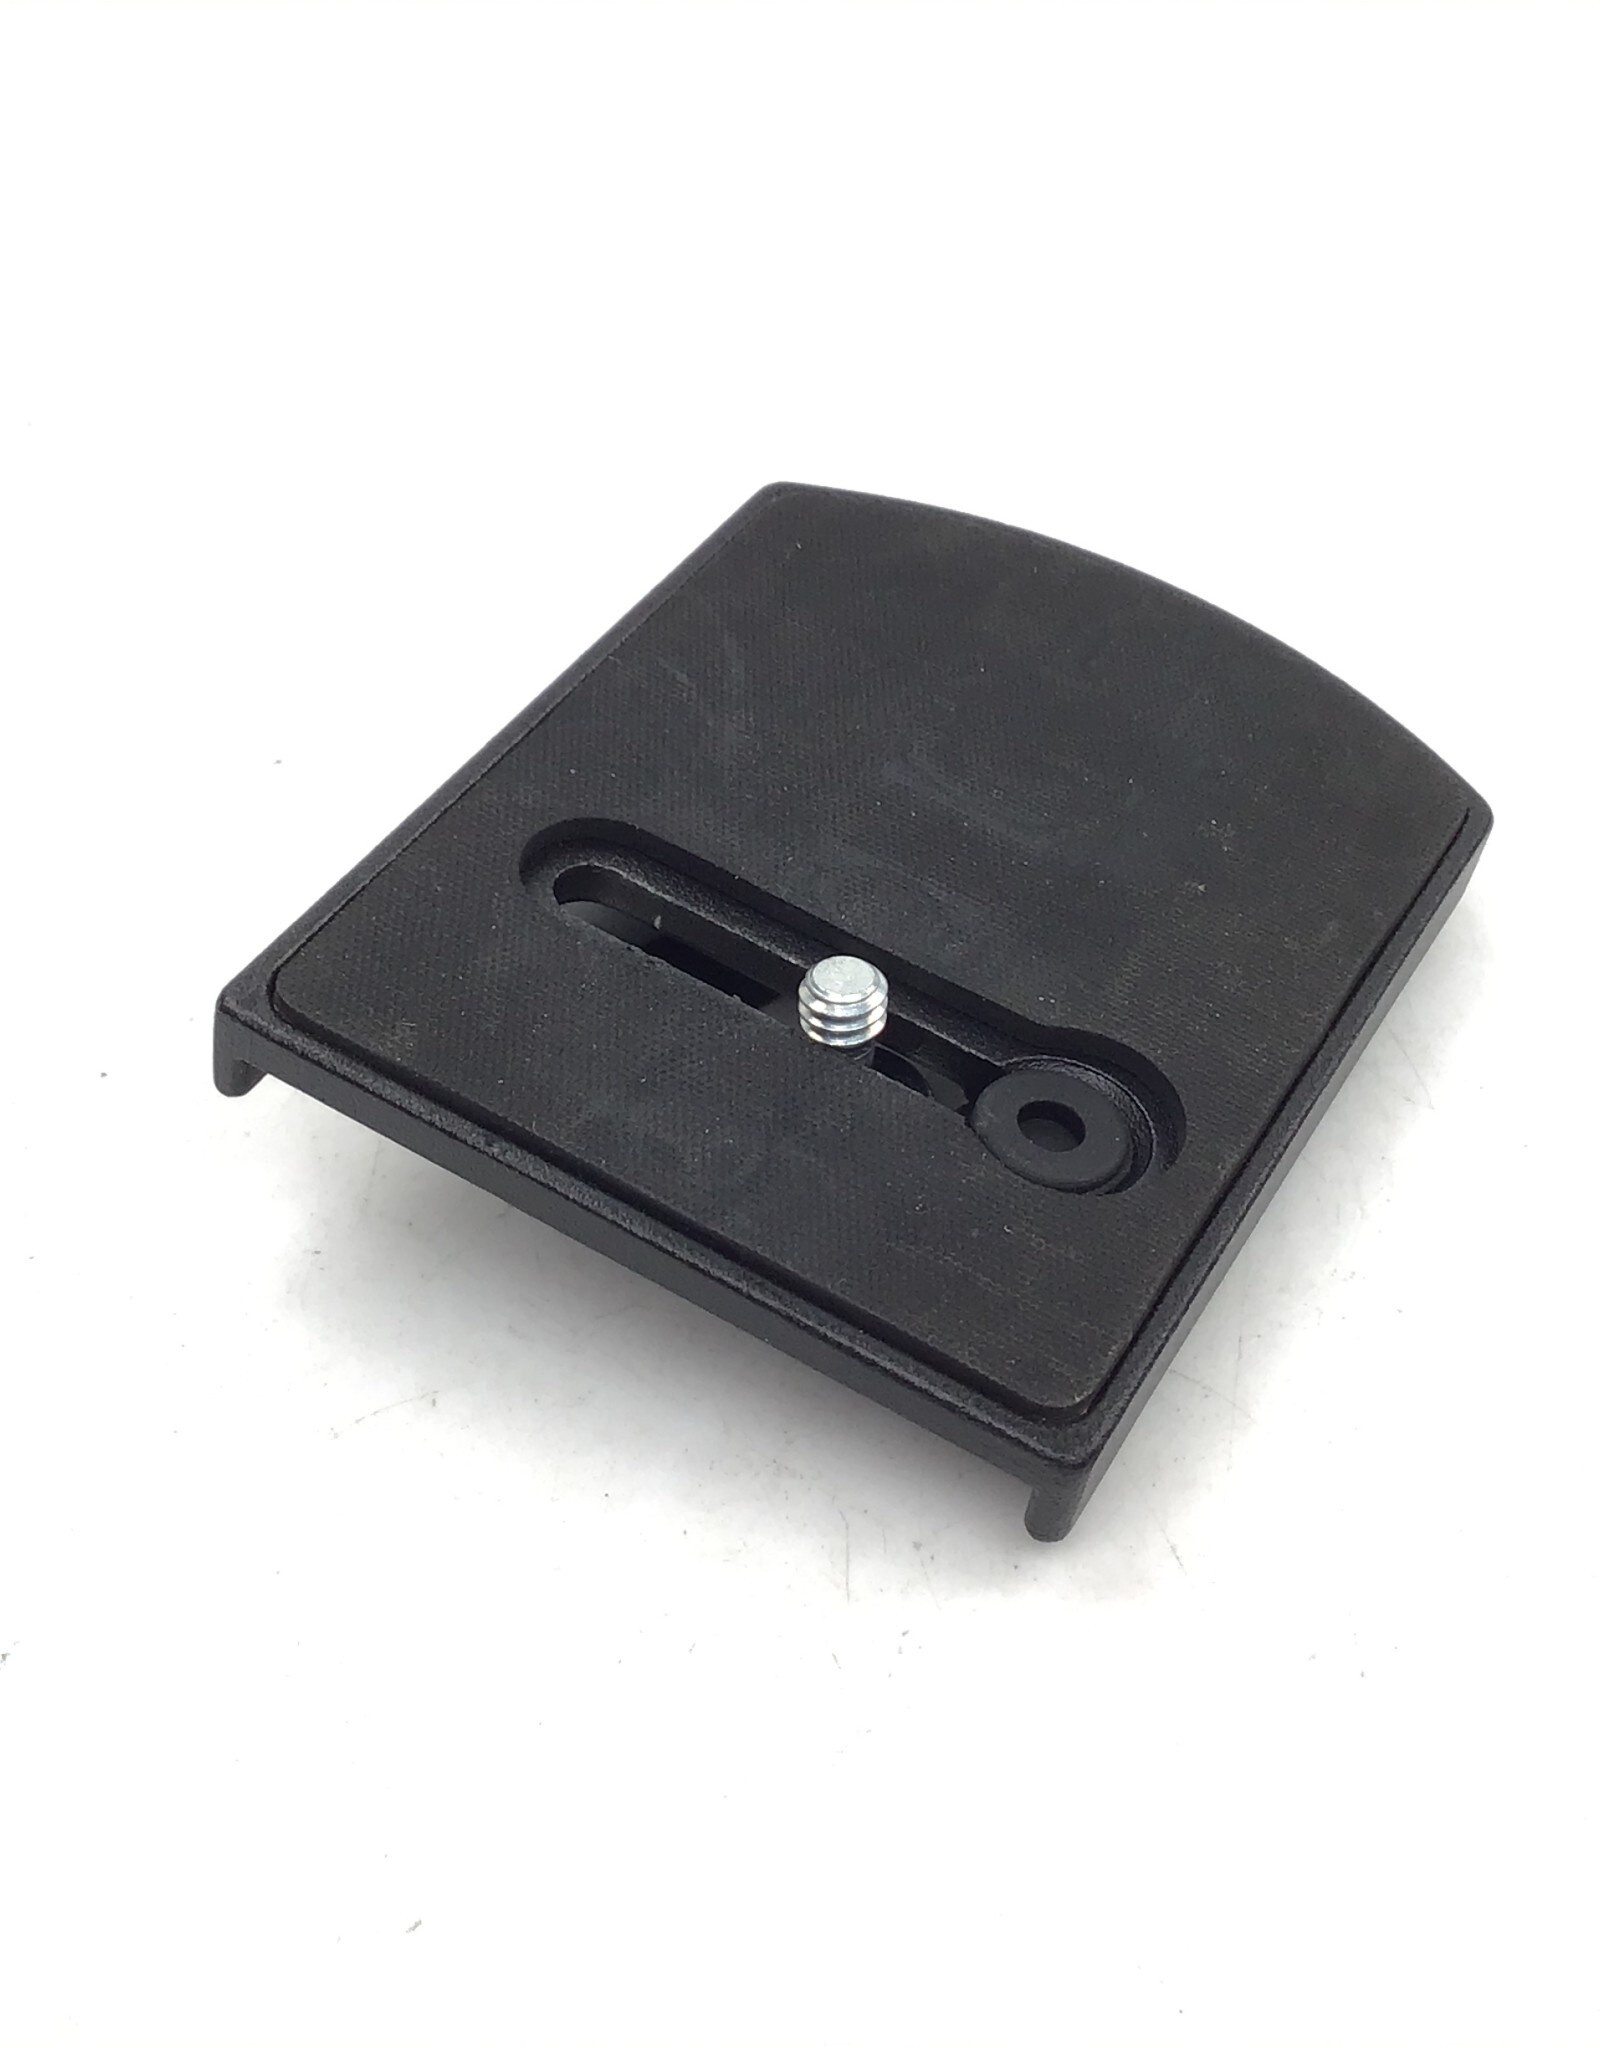 MANFROTTO Manfrotto 410PL Quick Release Plate for RC4 Quick Release System Used Good